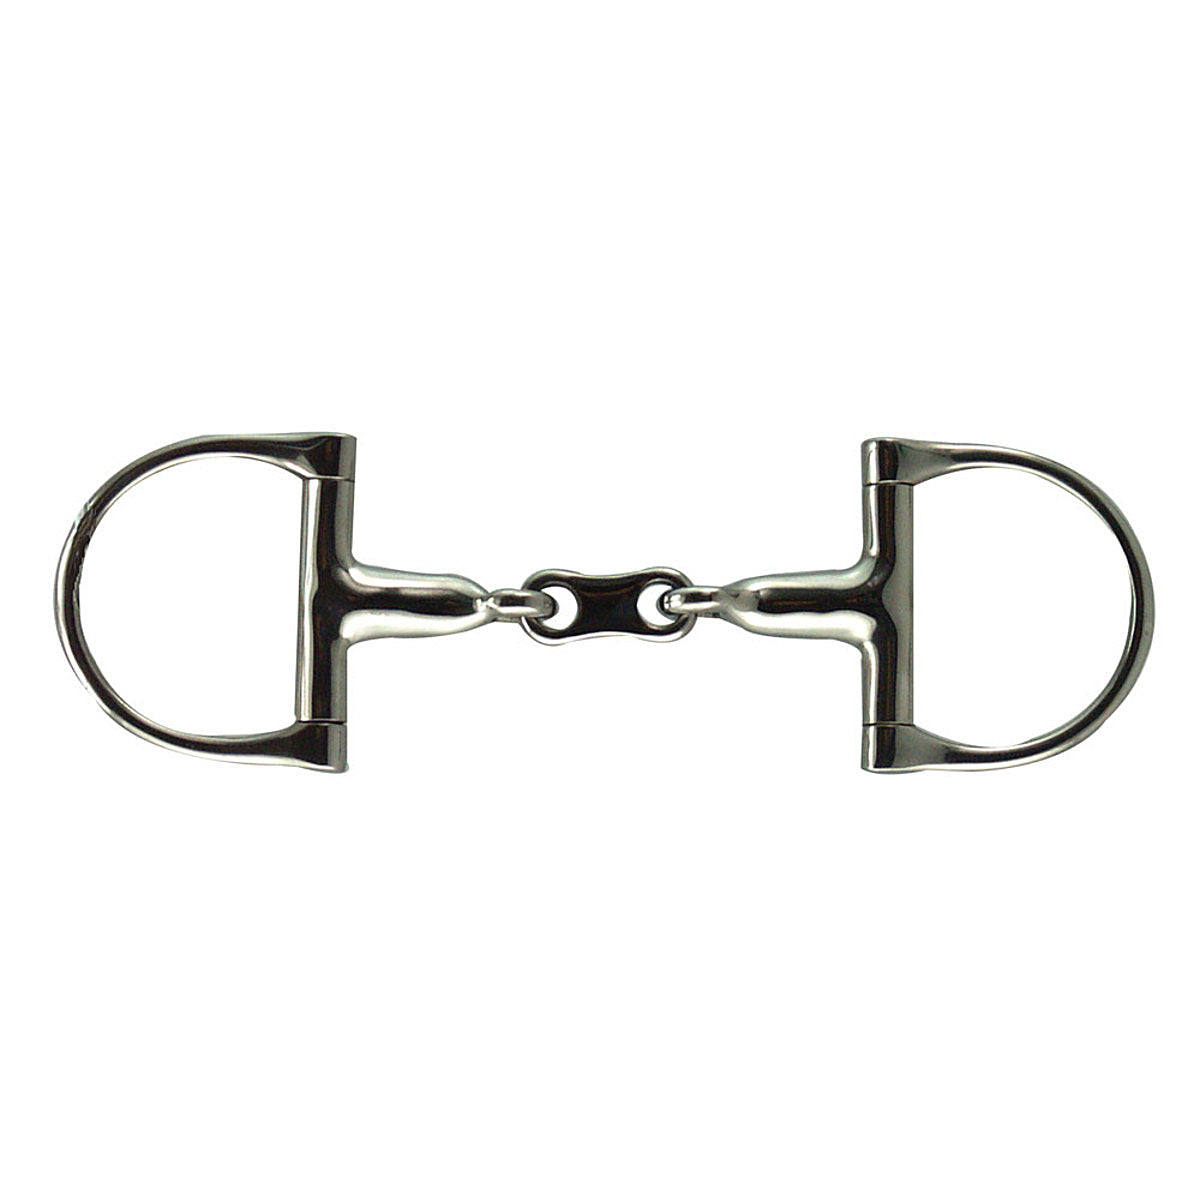 Coronet Pony French Link Dee Ring Snaffle Bit